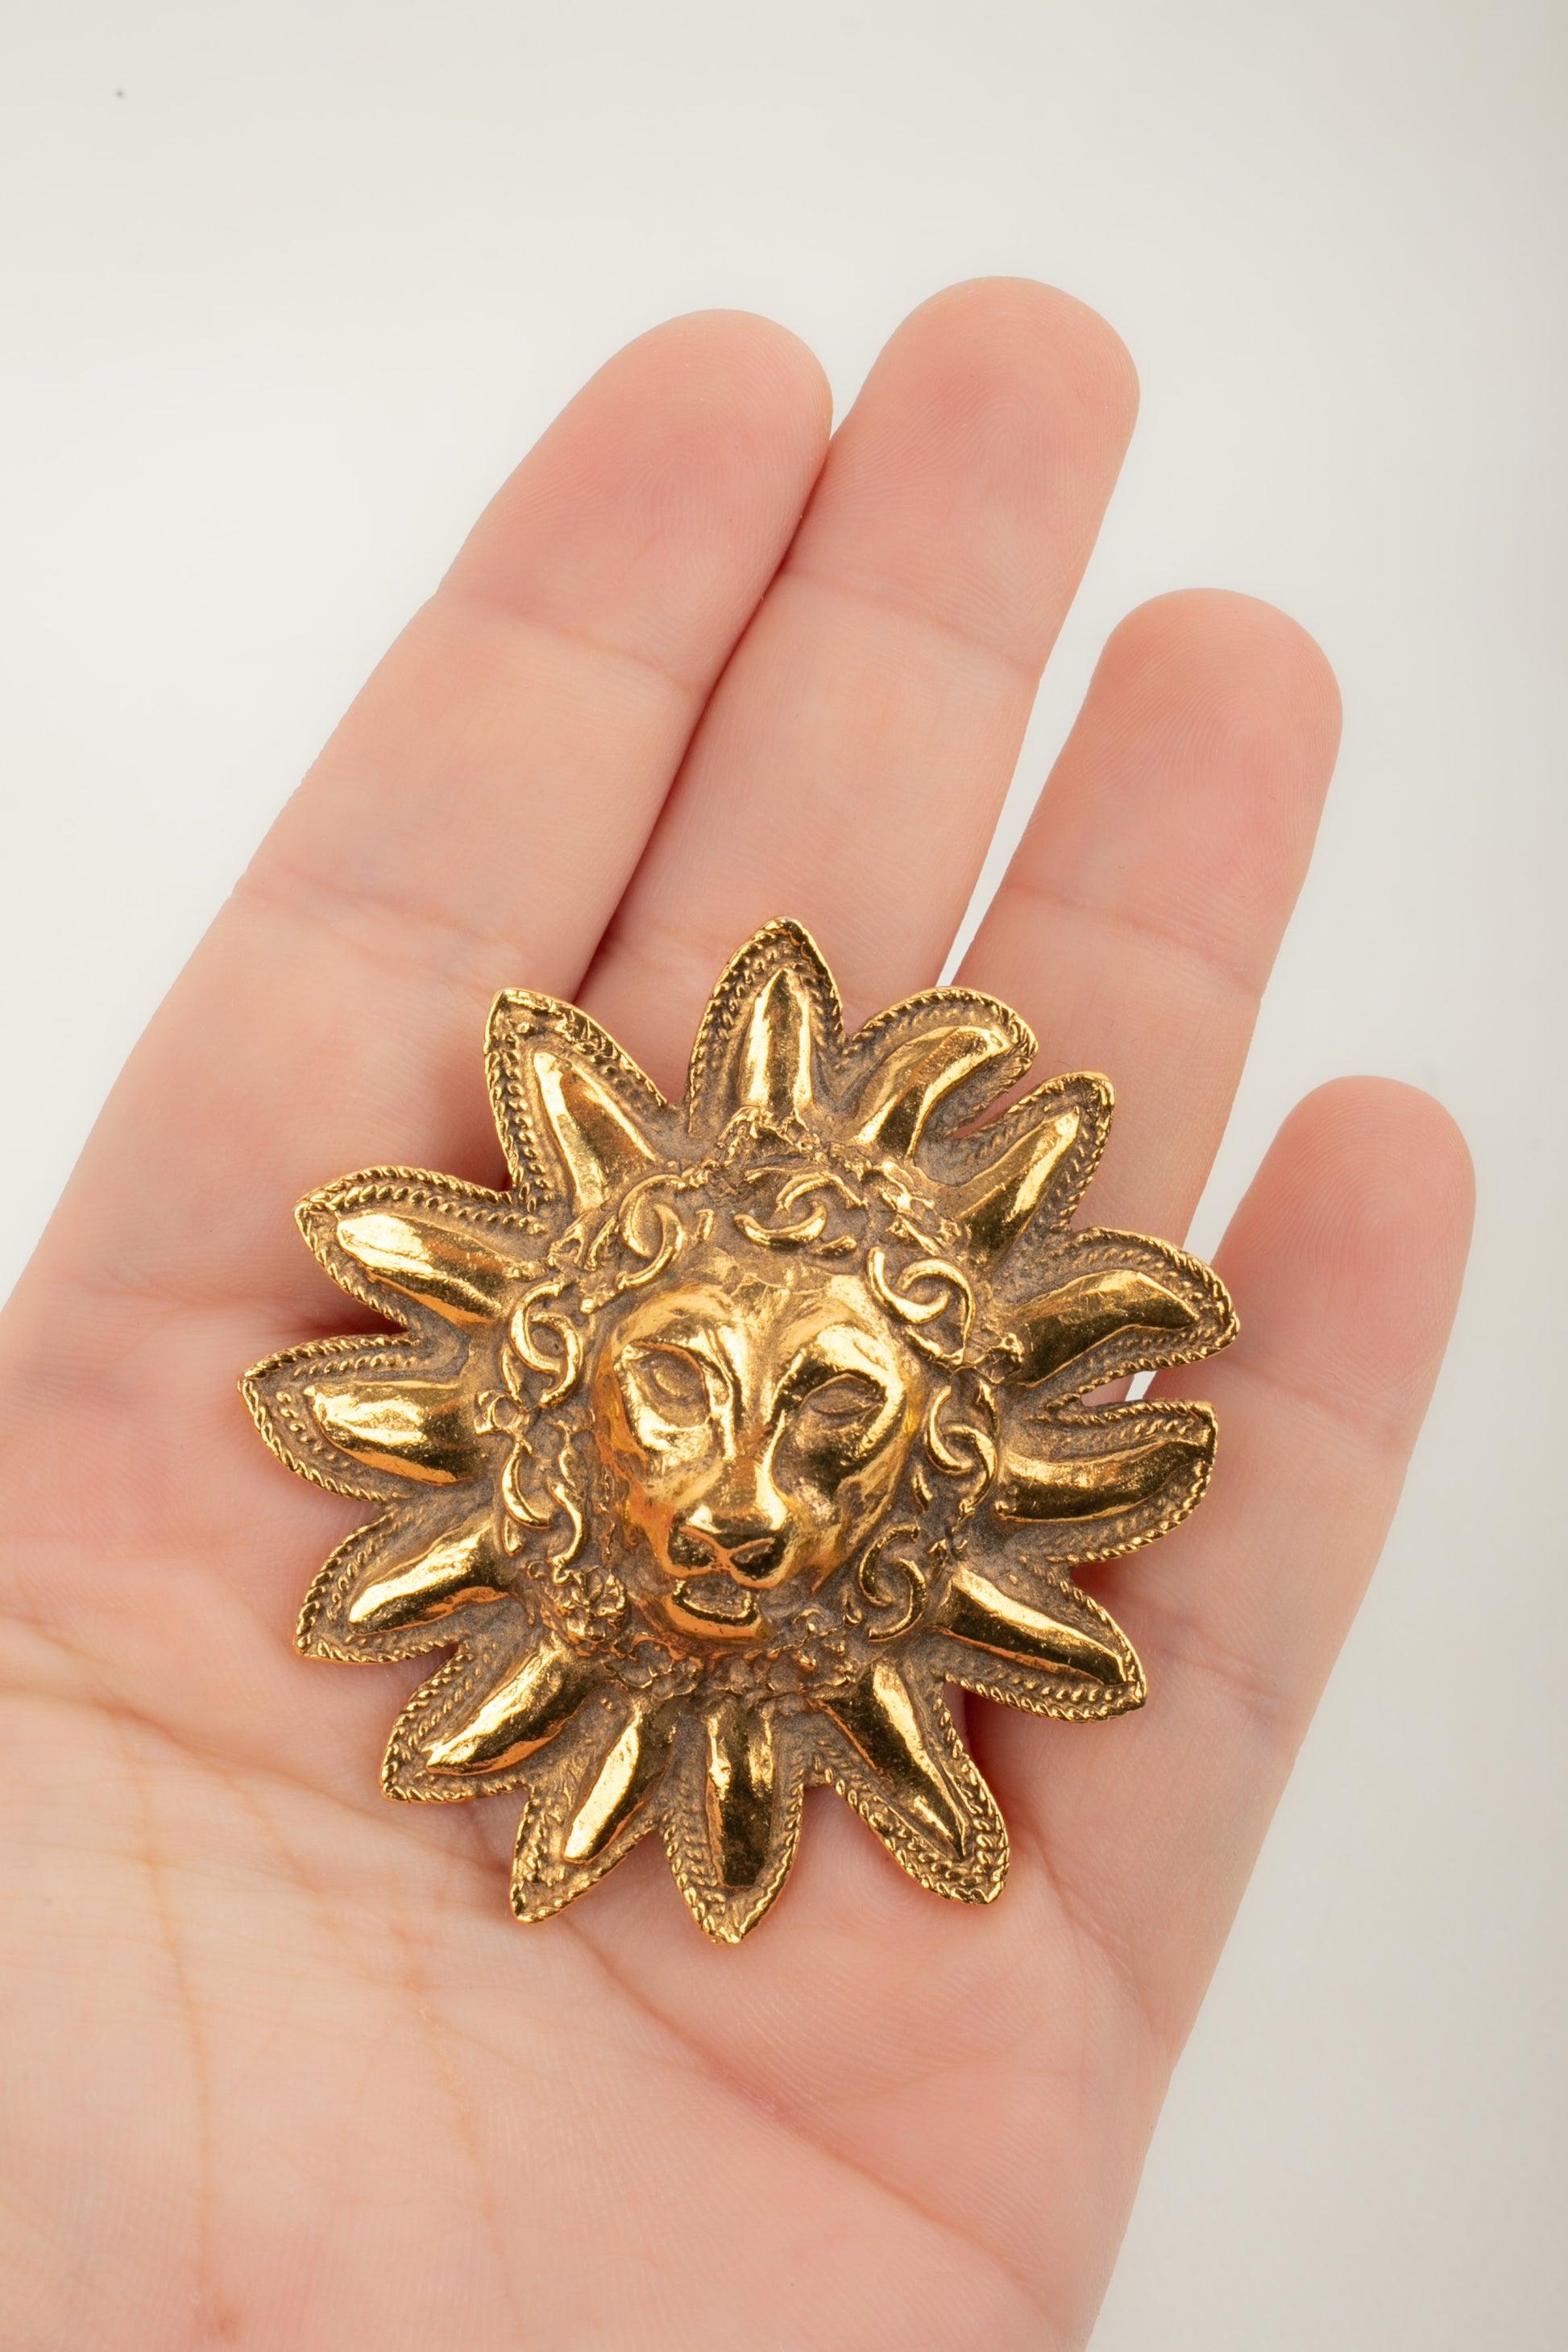 Chanel - (Made in France) Golden metal brooch representing a lion head with a cc logos mane.

Additional information:
Condition: Very good condition
Dimensions: Height: 5.3 cm

Seller Reference: BRB61
